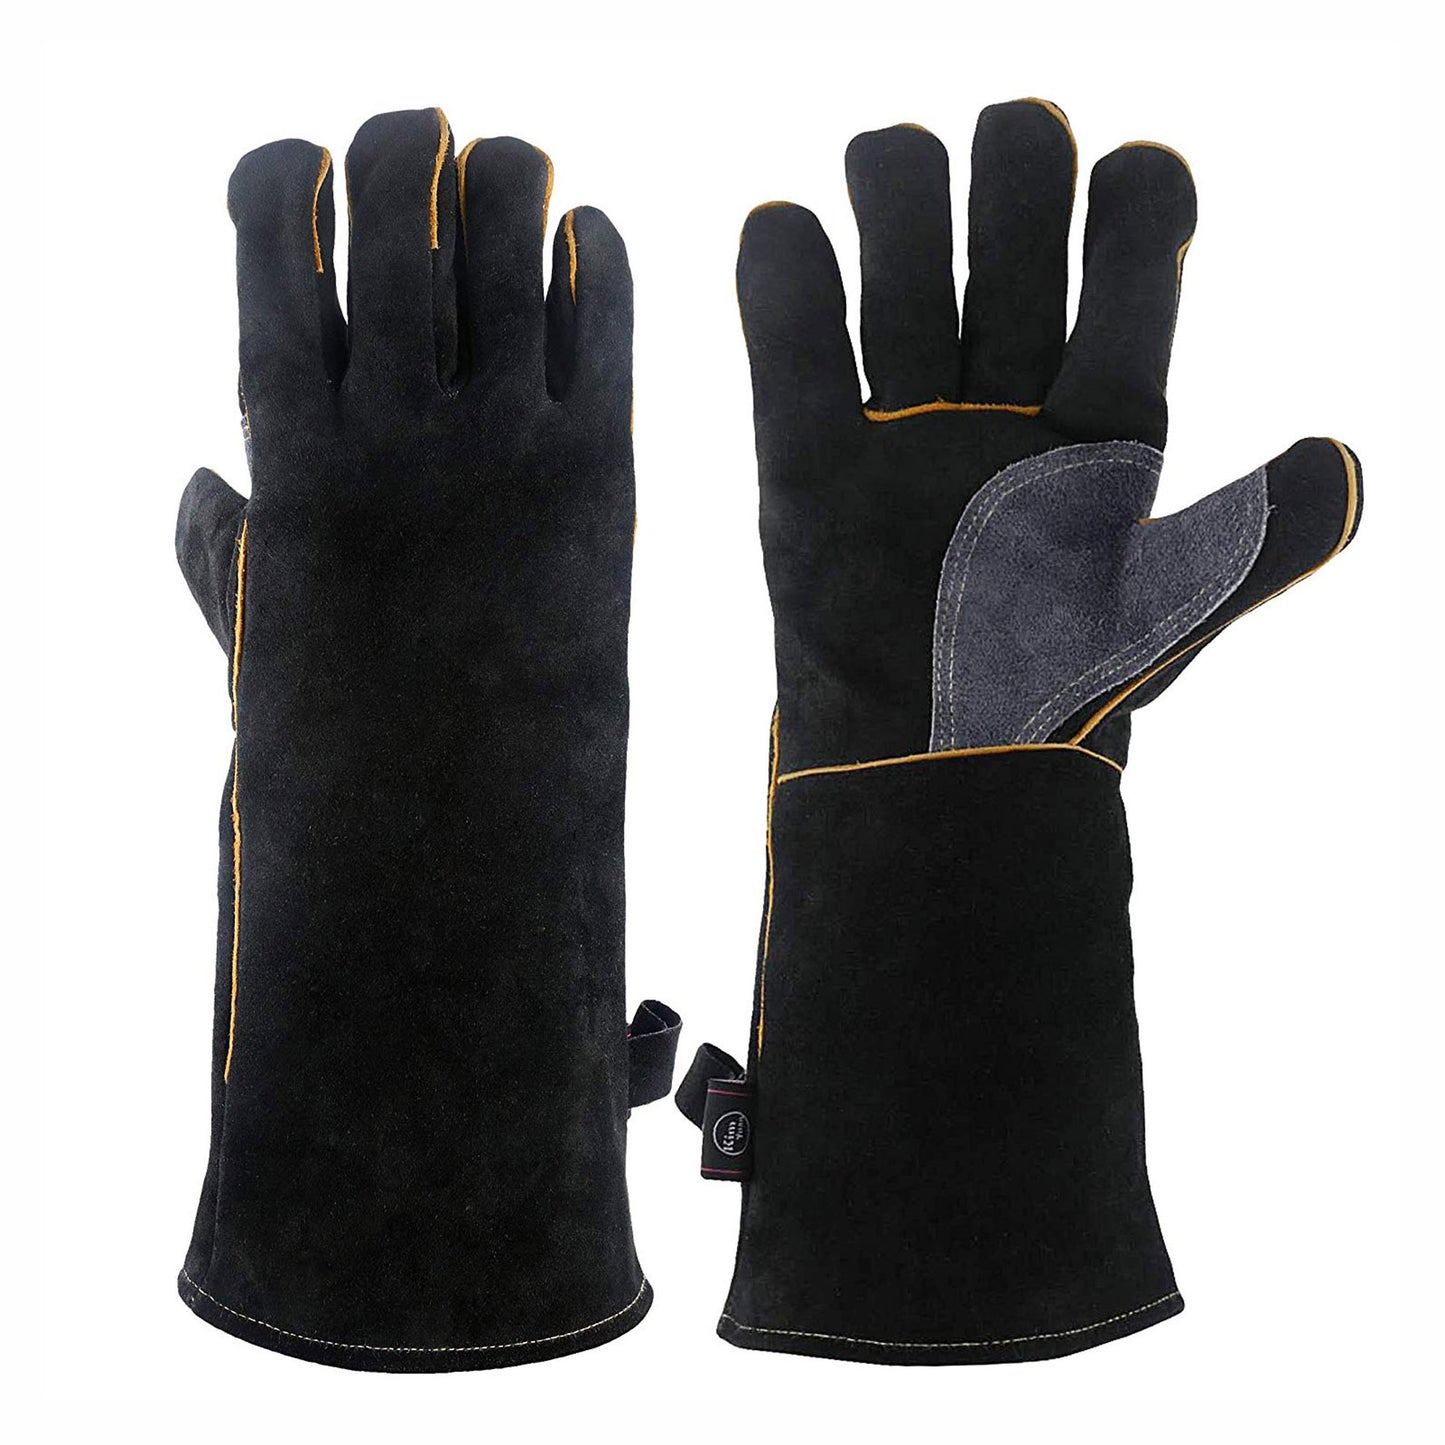 1 Pair 482°F Welding Gloves With Soft Lining, Mig/Stick Welder Heat/Fire Resistant, Mitts For Oven/Grill/Fireplace/Furnace/Stove/Pot Holder/Tig Welder